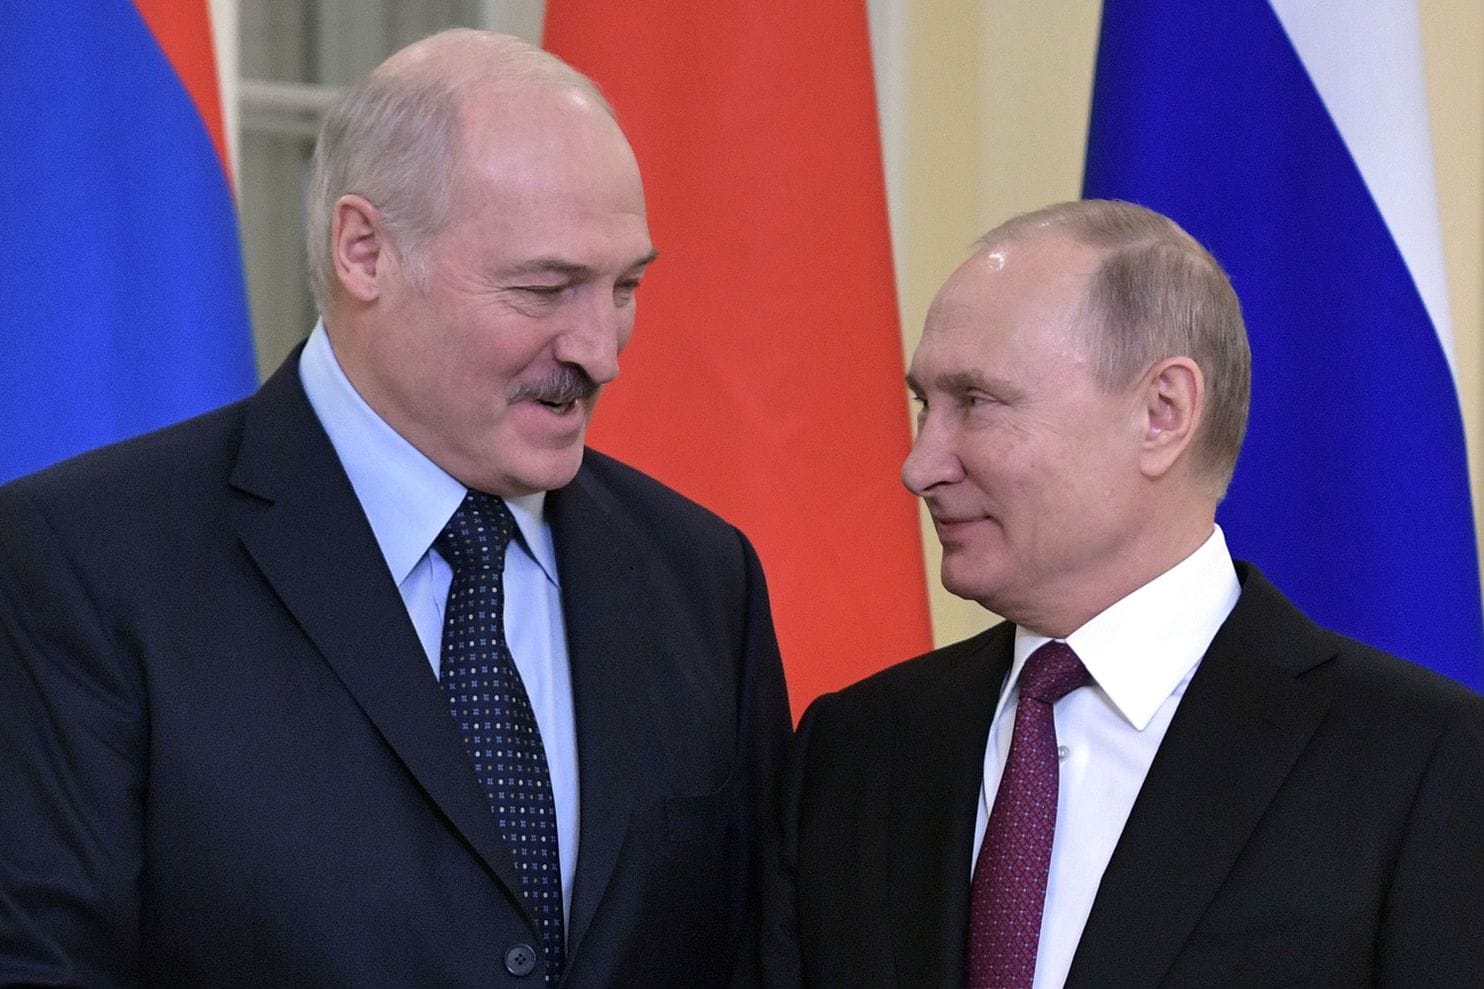 The Washington Post: Why the world should be paying attention to Putin’s plans for Belarus